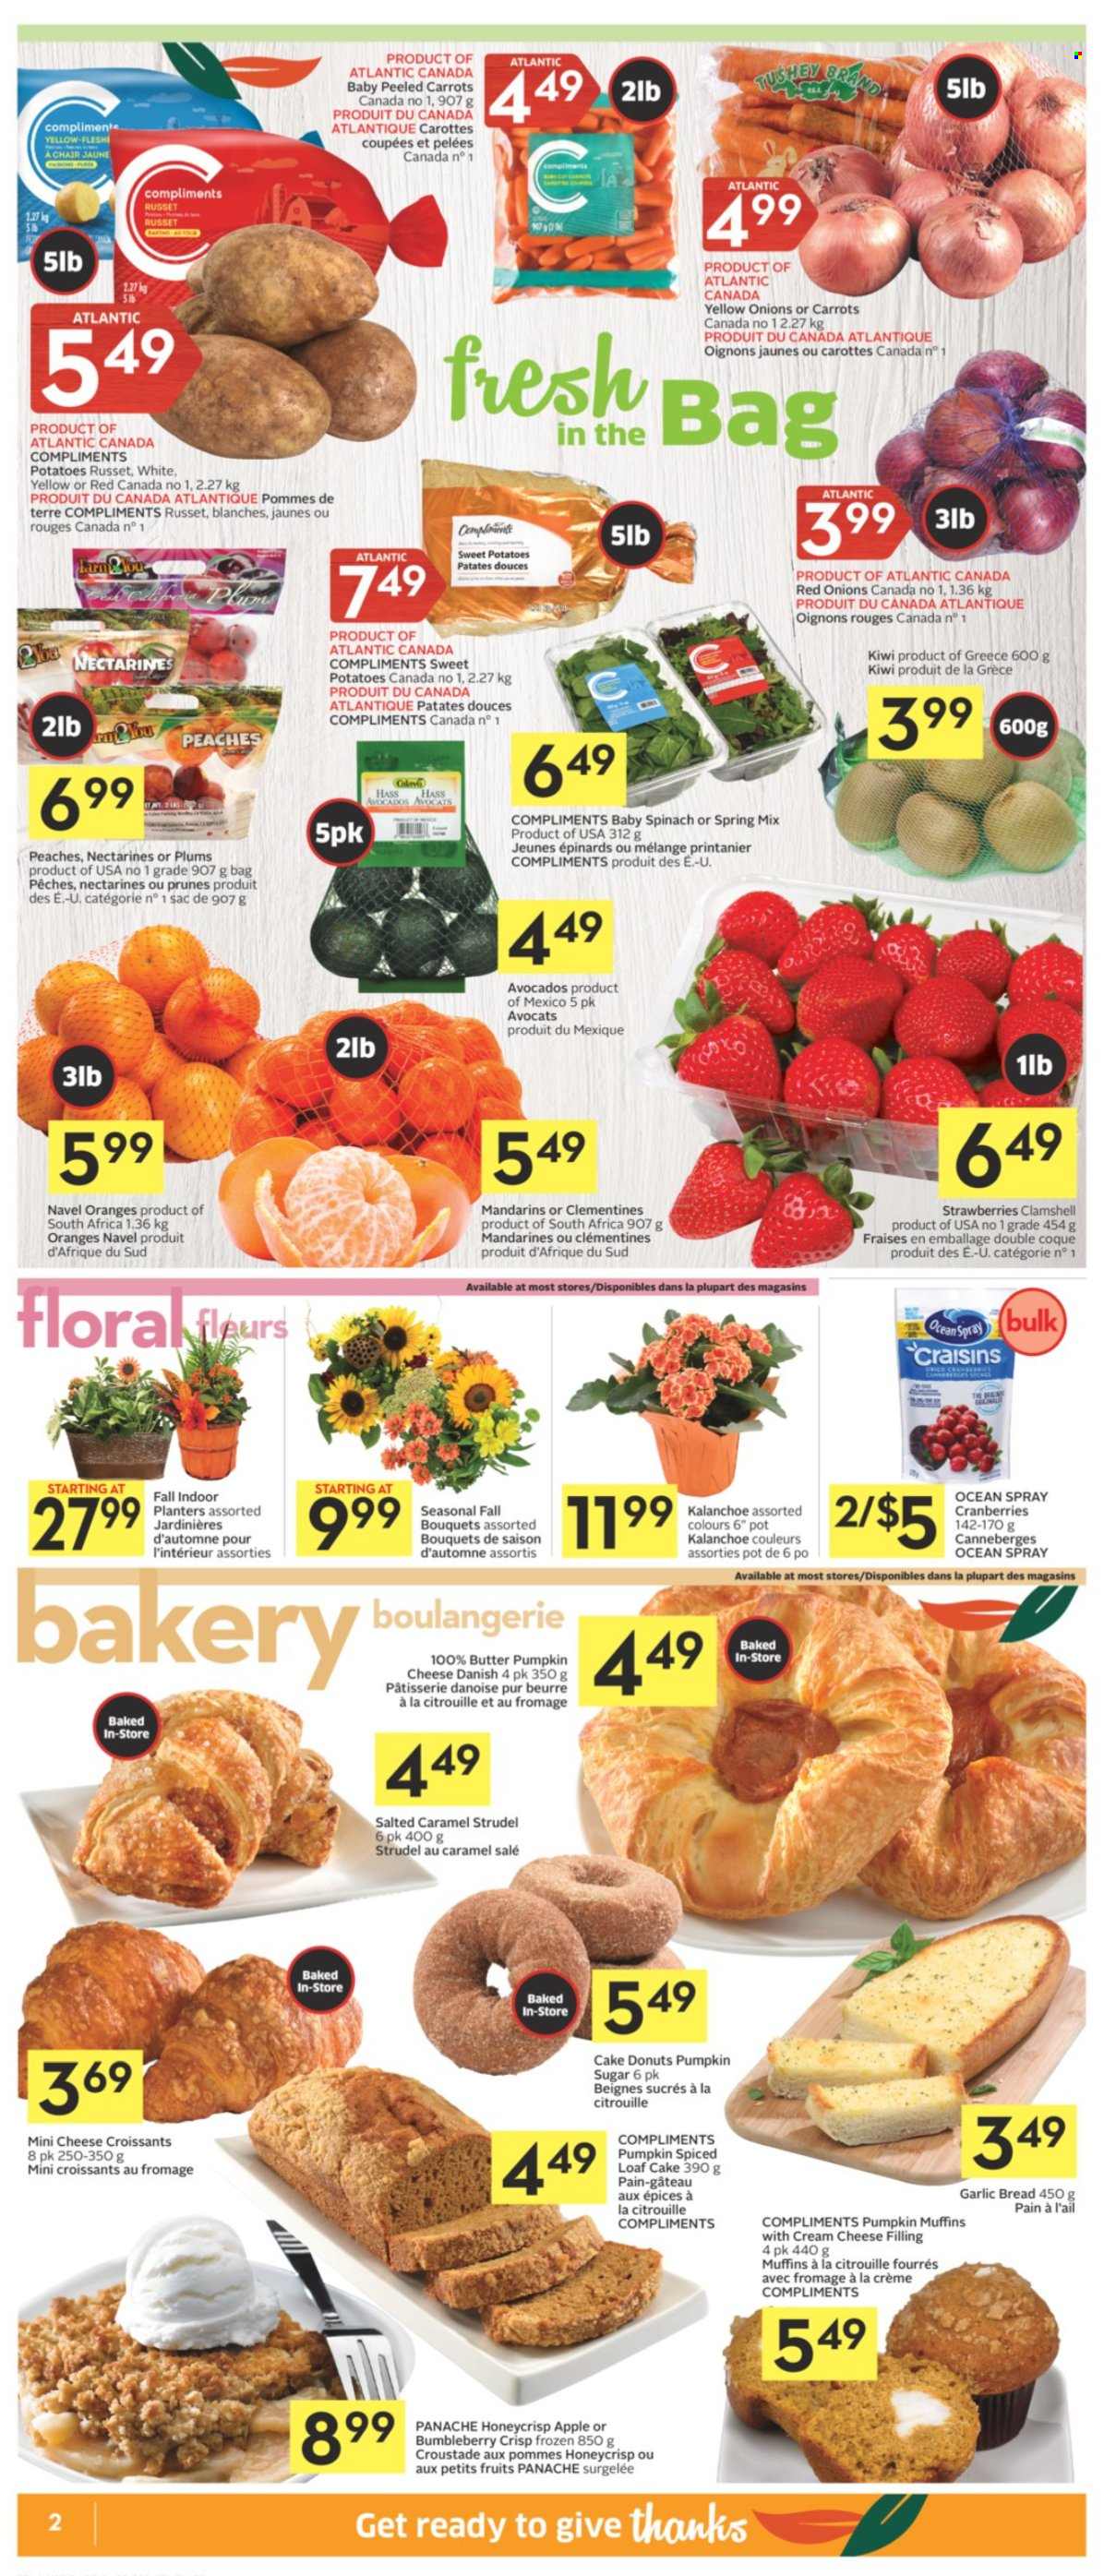 thumbnail - Co-op Flyer - September 30, 2021 - October 06, 2021 - Sales products - bread, cake, croissant, strudel, donut, muffin, loaf cake, carrots, red onions, russet potatoes, sweet potato, potatoes, pumpkin, onion, avocado, clementines, mandarines, nectarines, plums, peaches, navel oranges, cheese, butter, sugar, craisins, cranberries, prunes, dried fruit, Planters, kiwi, oranges. Page 2.